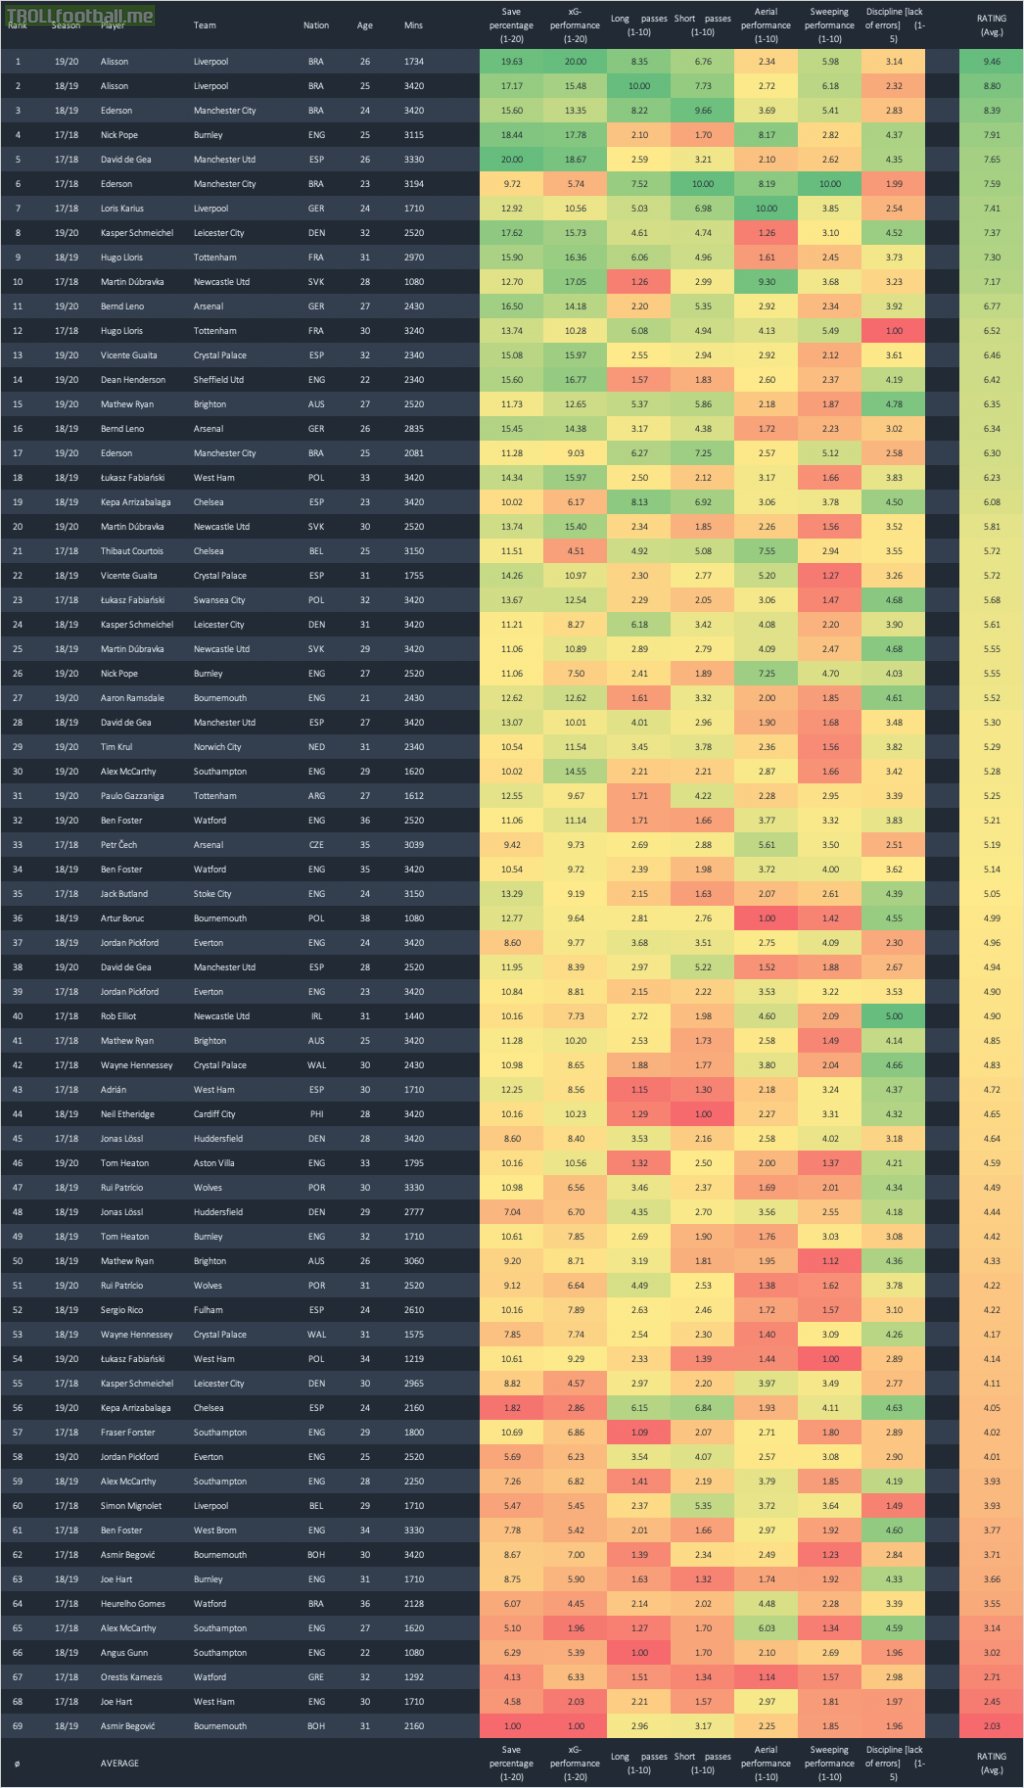 [OC] How good is Alisson this season when compared to De Gea in 17/18? Here's weighted statistics for all GK's in the PL with at least 1000 minutes played over the last three seasons.